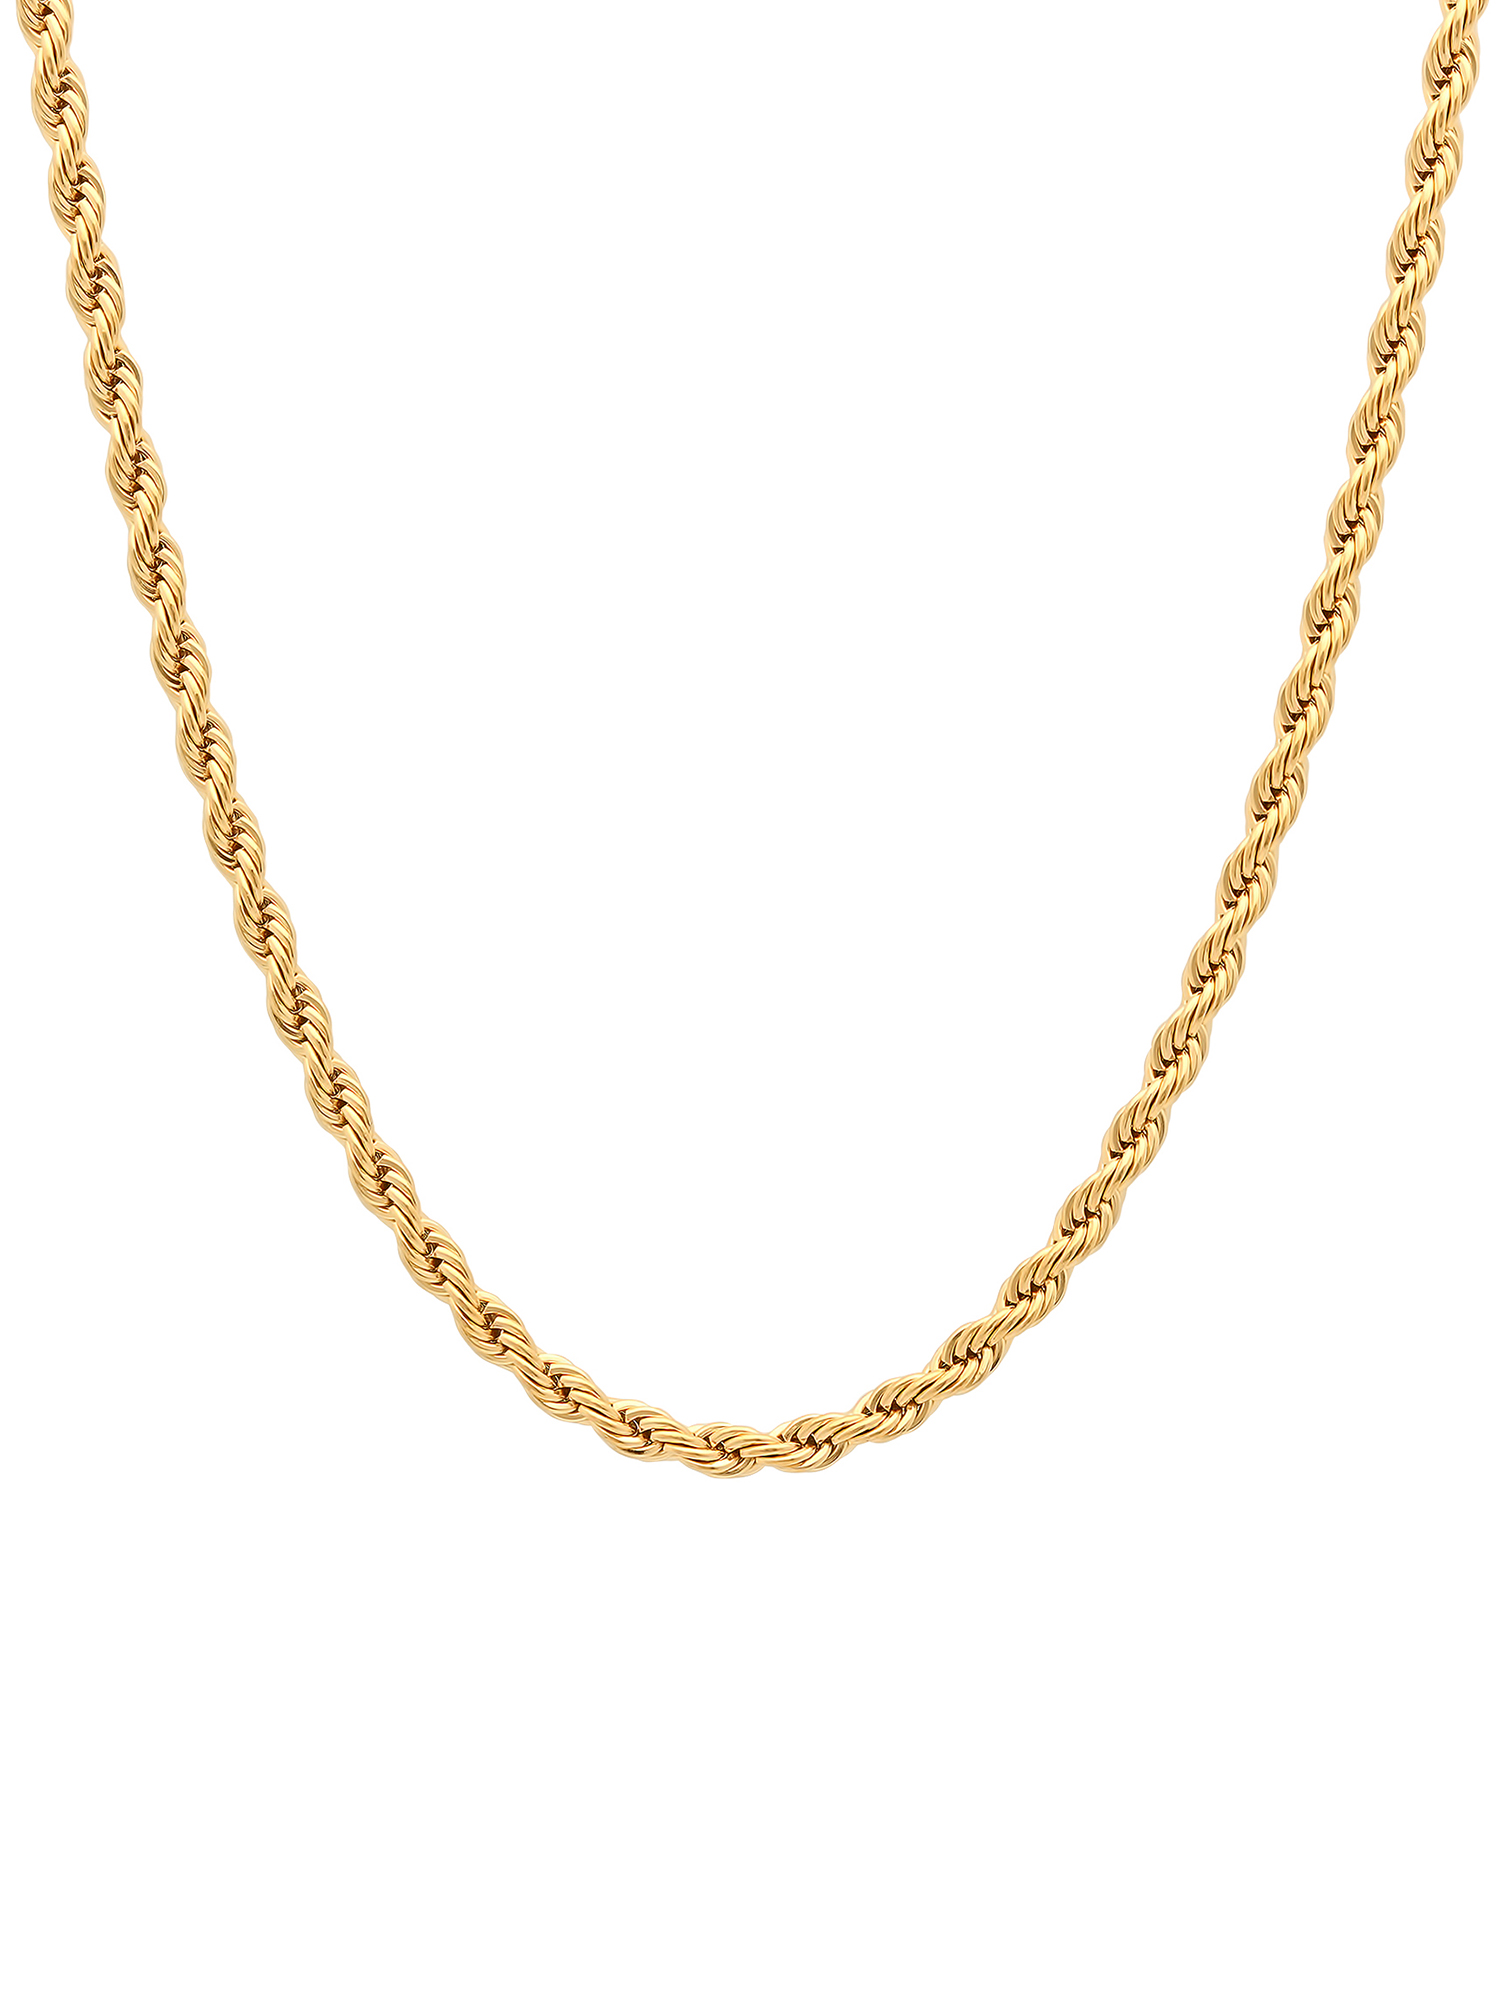 Gold-Tone Stainless Steel 2.3MM Rope Link 24 Chain Necklace, Unisex